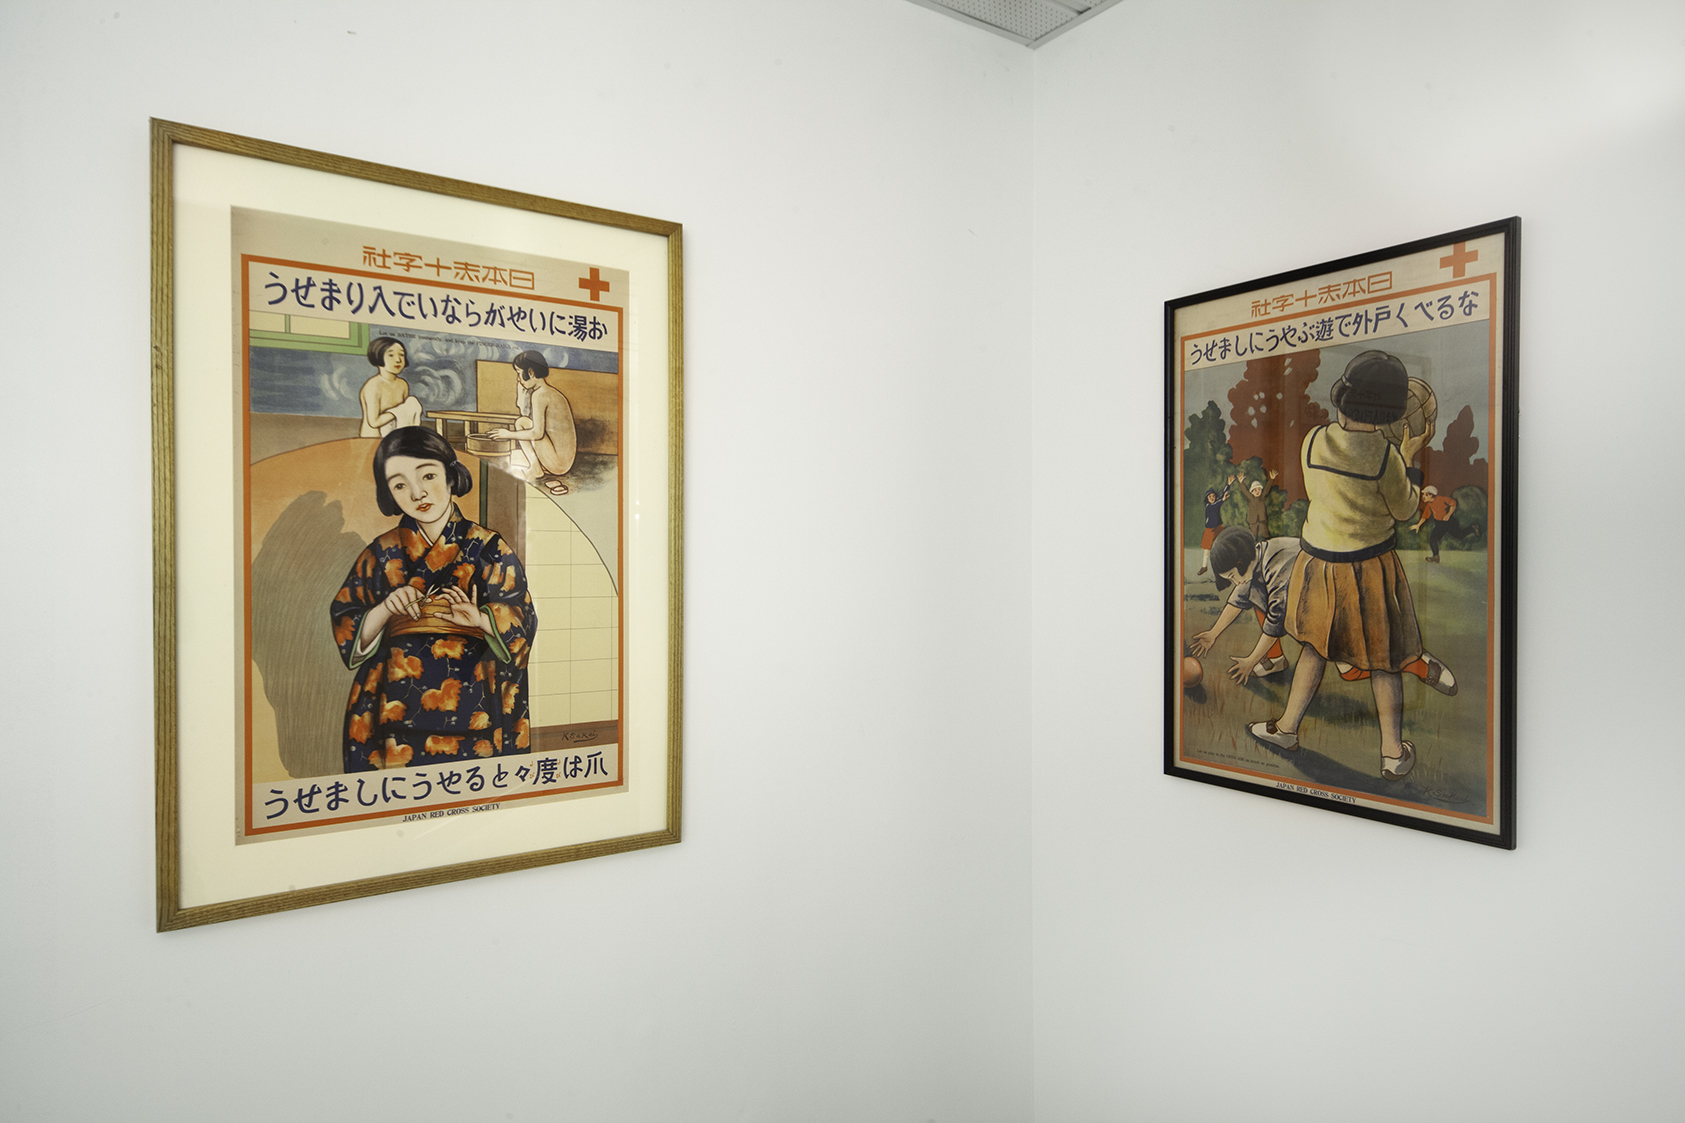 Two framed posters with Japanese script hanging in the corner of a white room. One with a young woman trimming her nails in a kimono. The other features school children playing catch in a park.